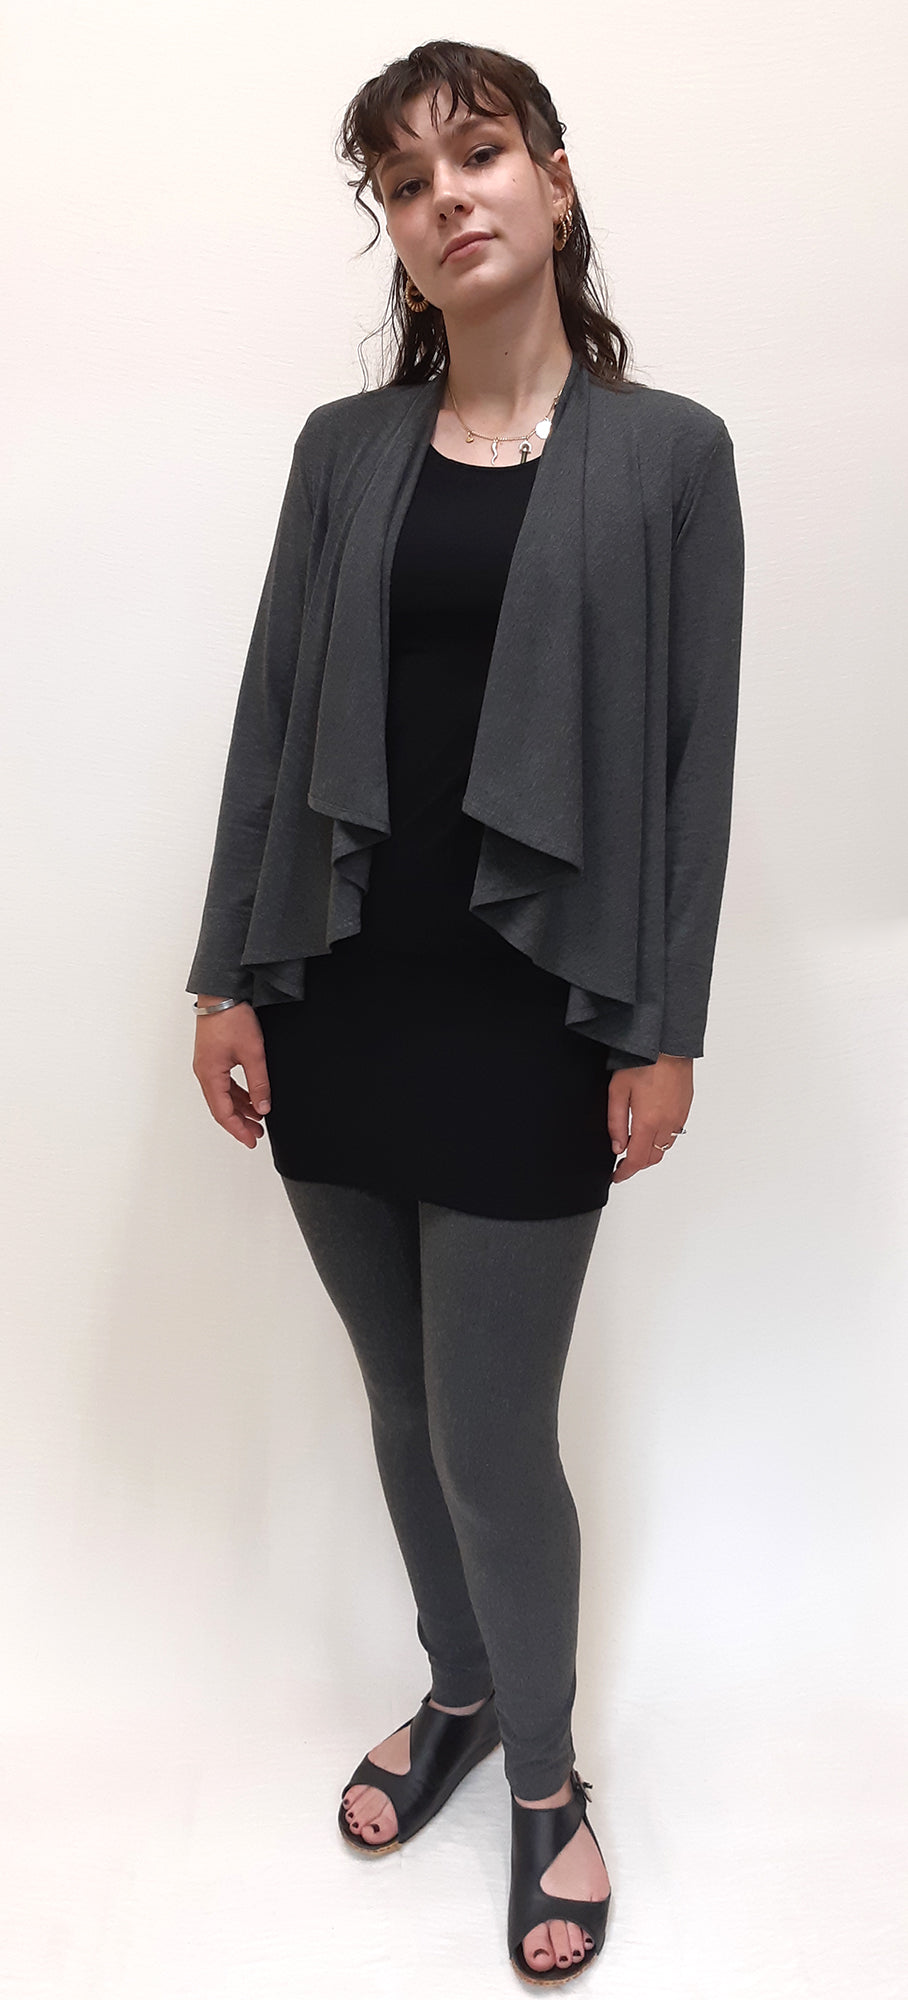 Bamboo Short Cardigan Wrap Charcoal - L only